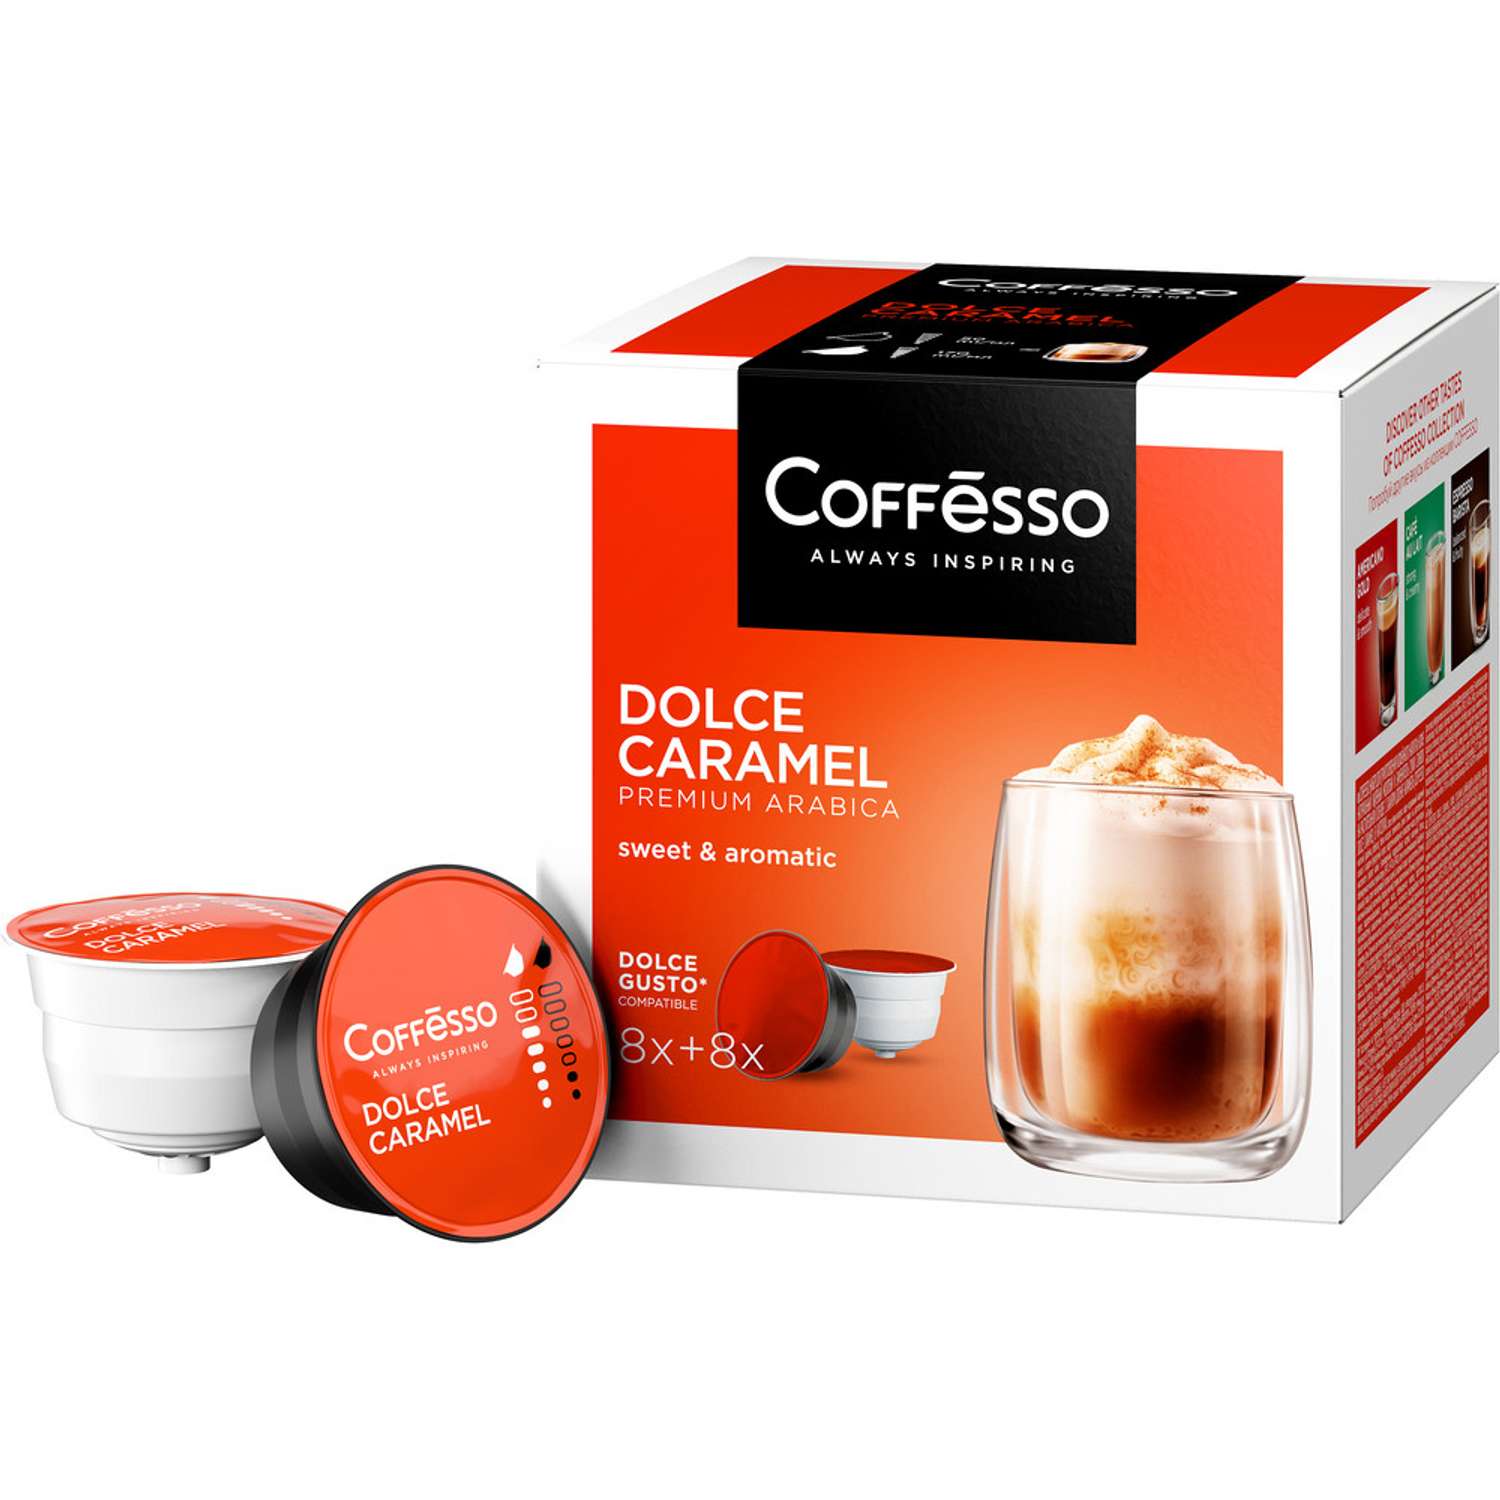 Caramel dolce. Dolce gusto капсулы Espresso.